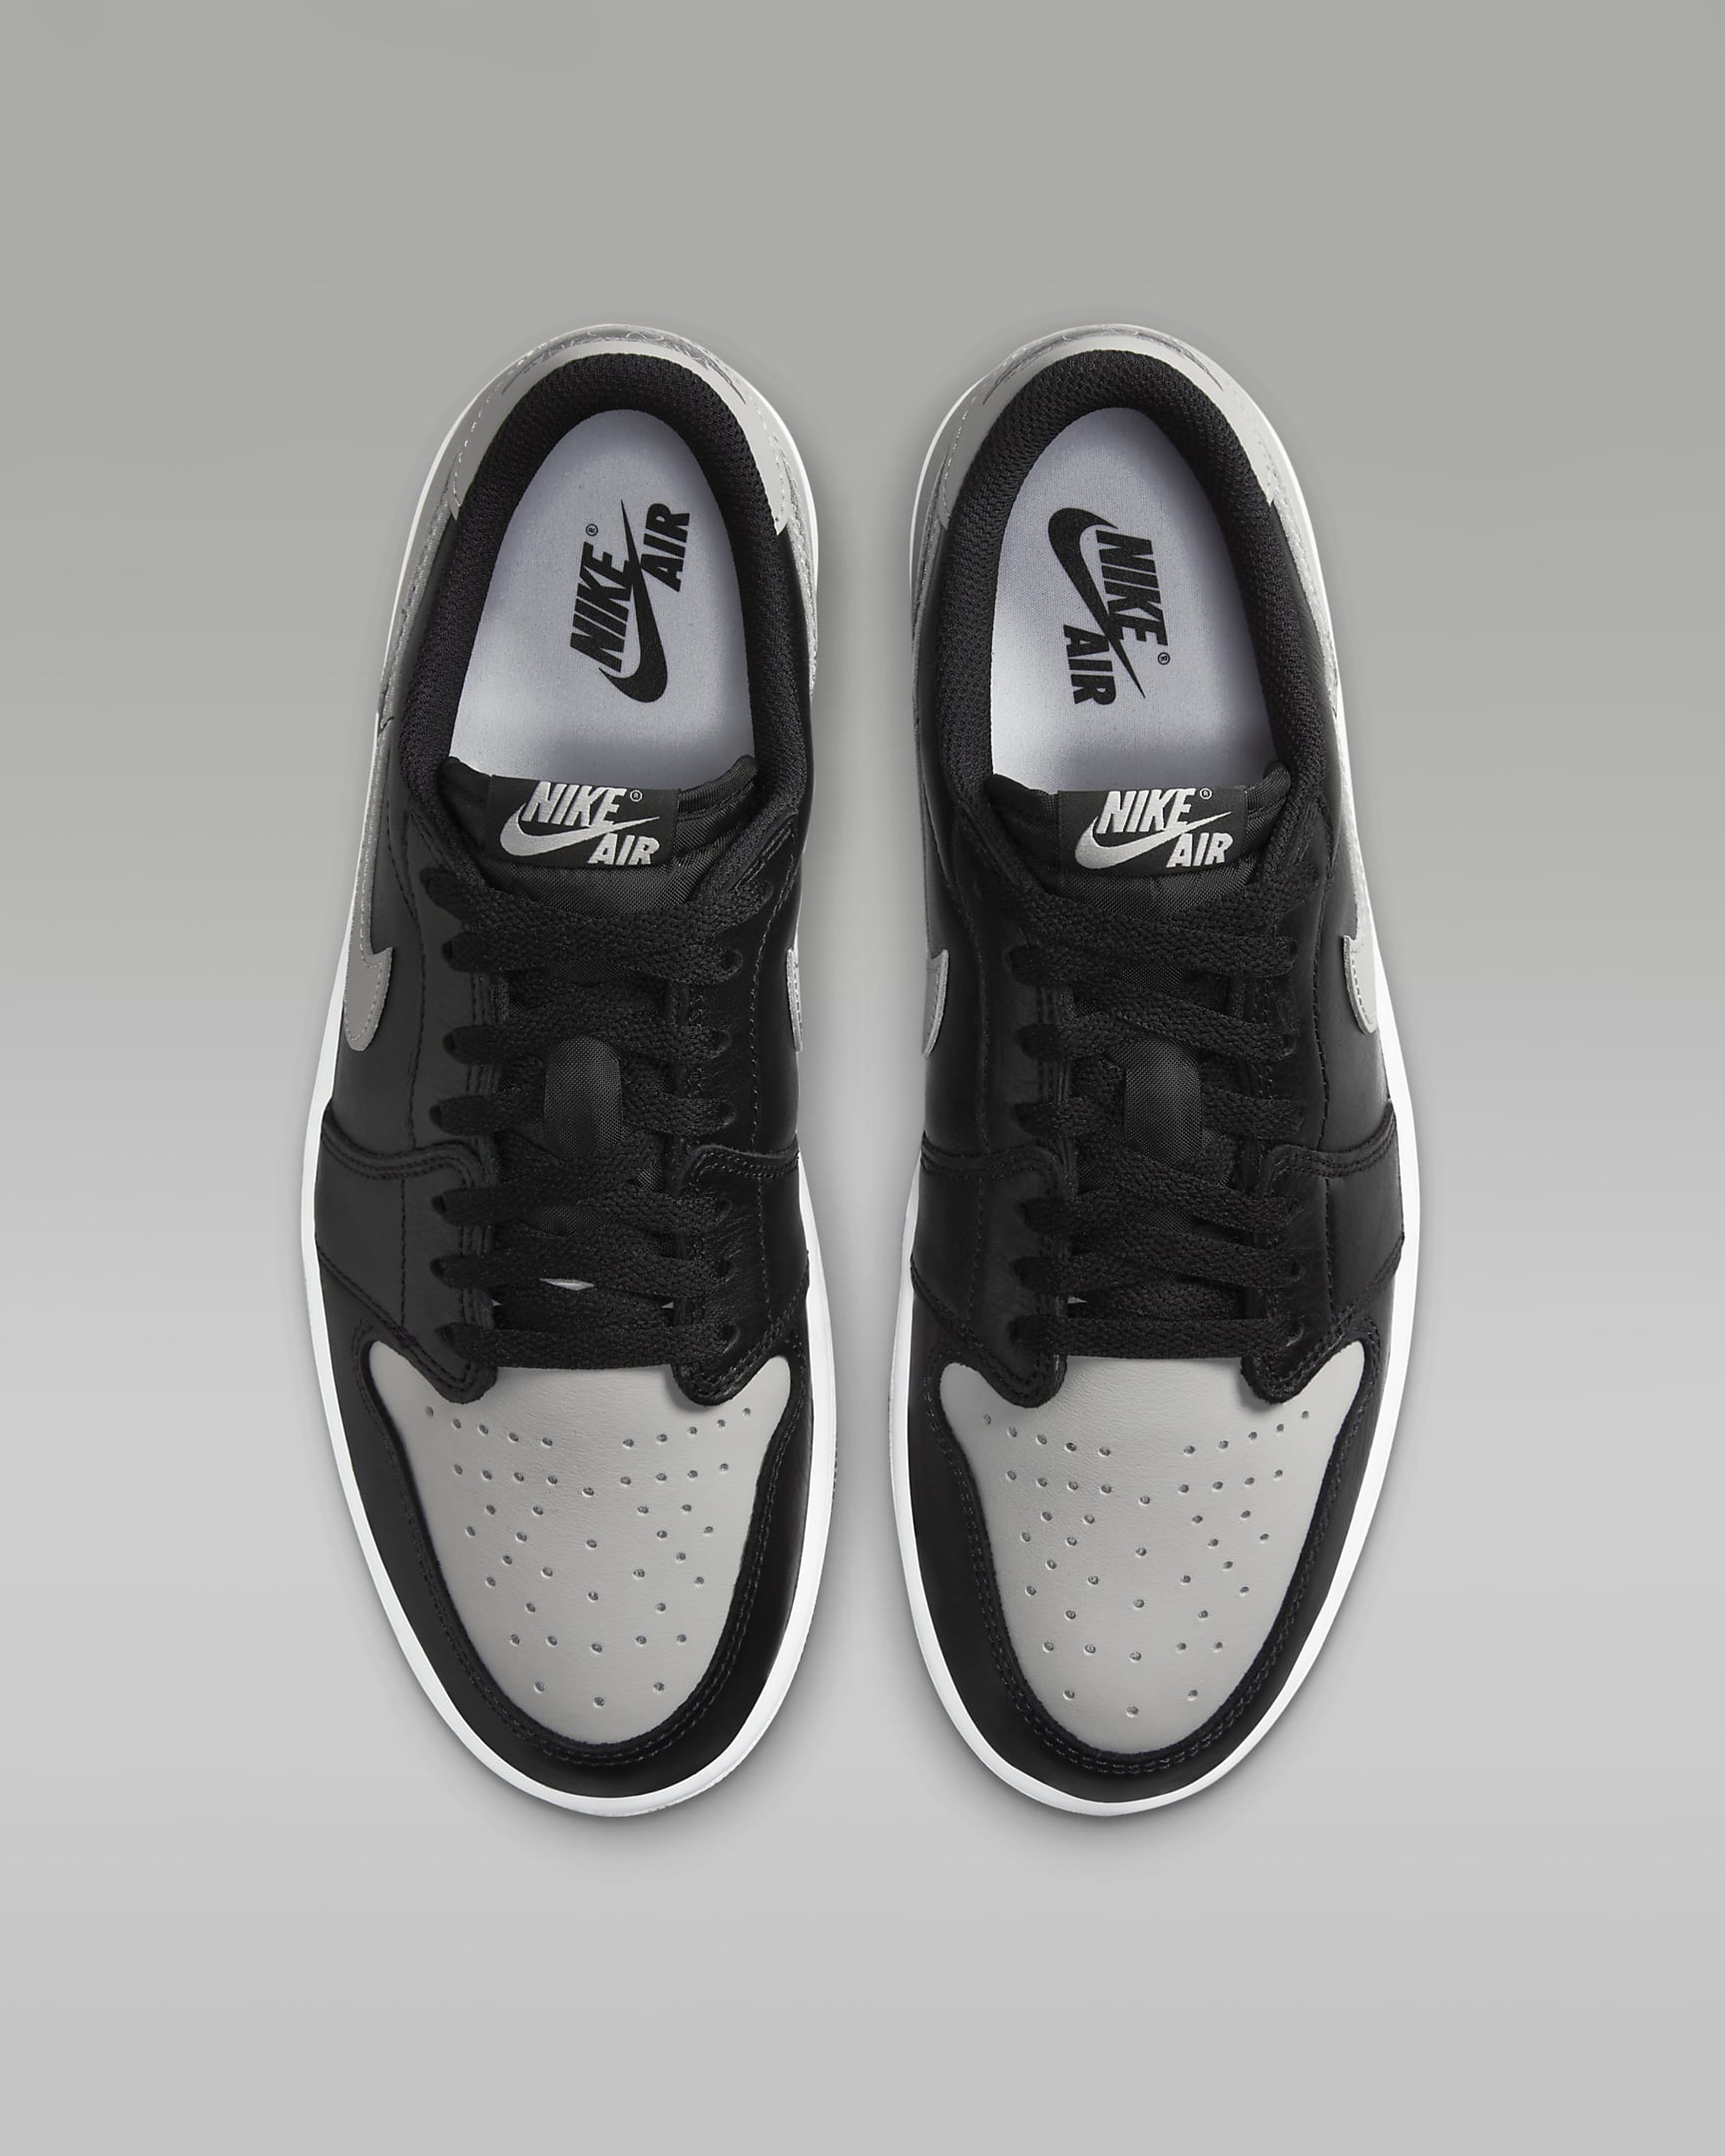 Air Jordan 1 Low OG “Shadow” Shoes Review: New Released with Colors and Textures